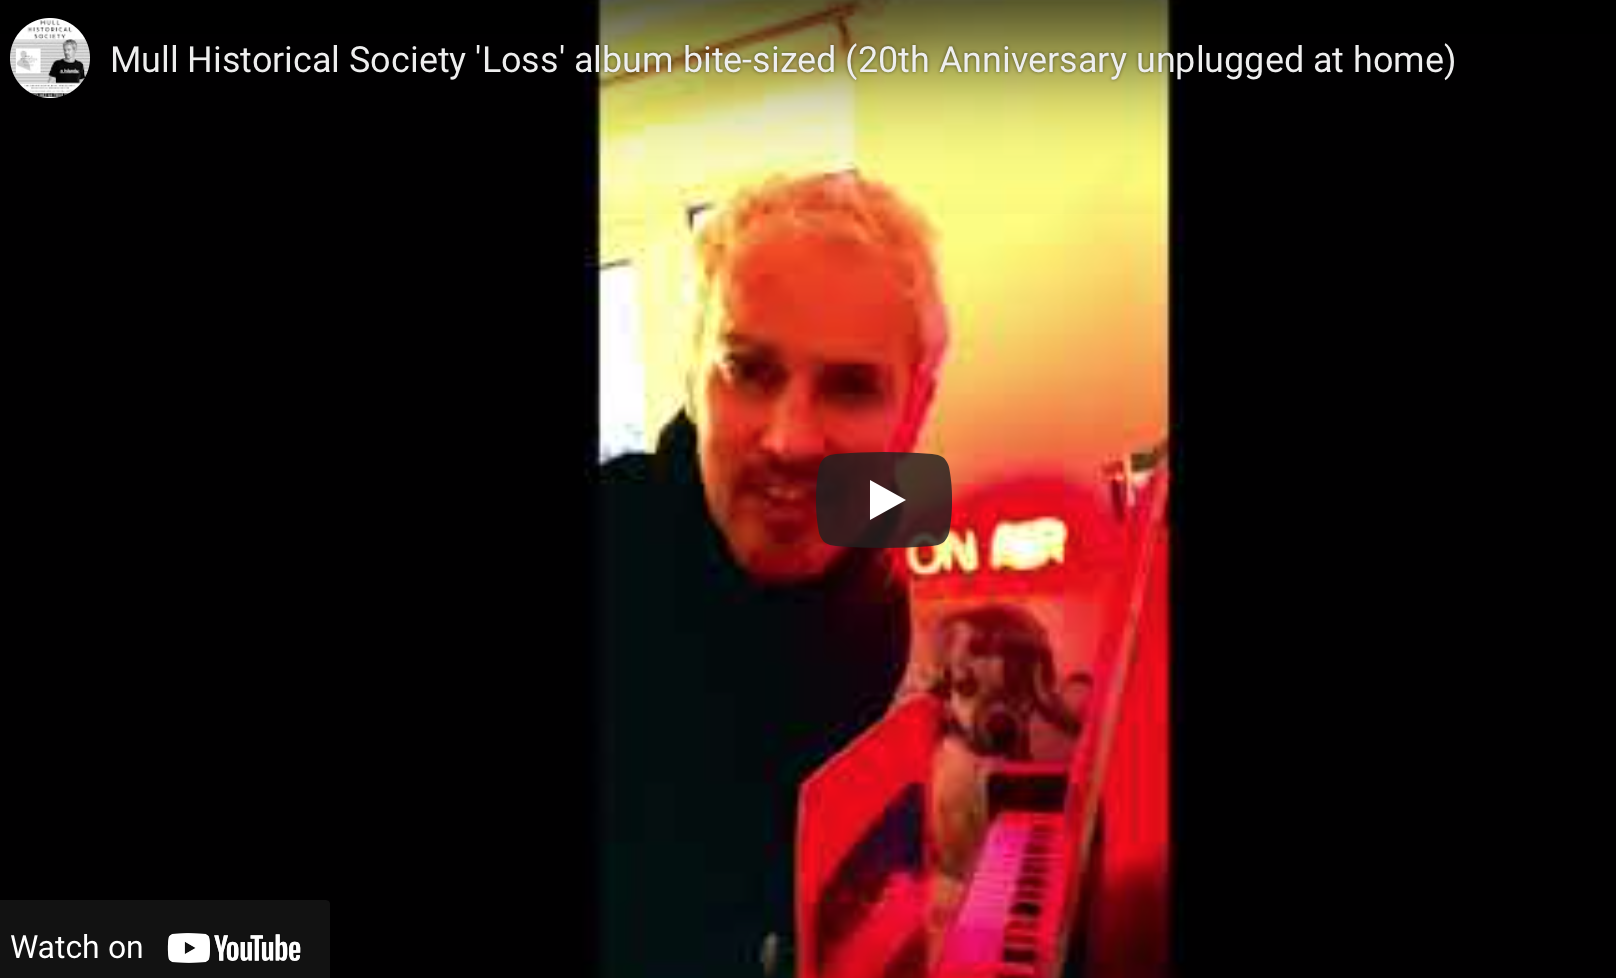 Colin comes to you and plays MHS debut album ‘Loss’ (unplugged) from home – if you were affected by the Glasgow show postponement!